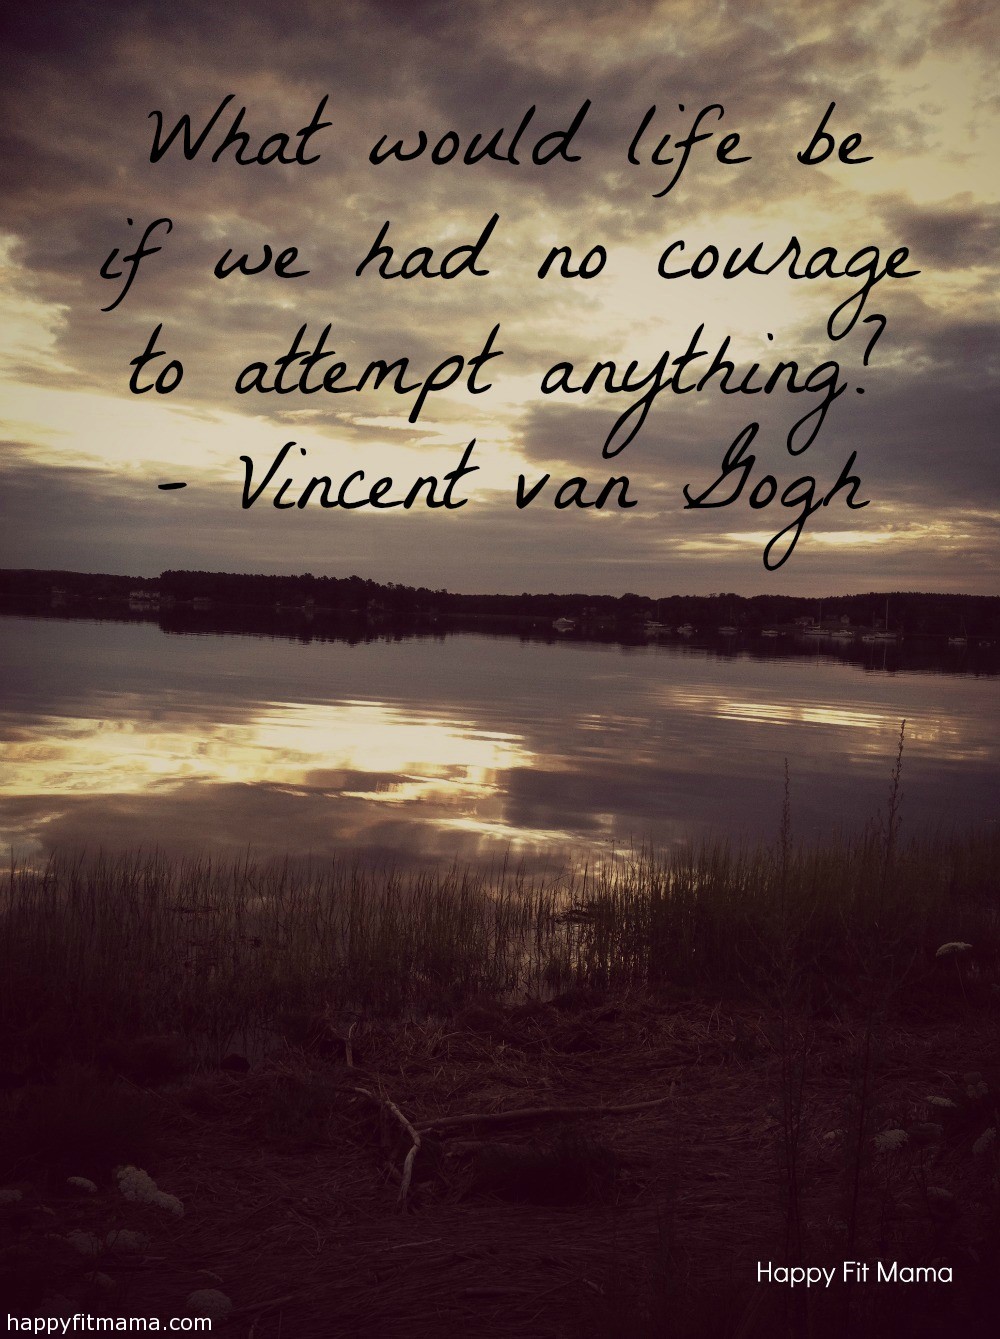 What would life be if we had no courage to attempt anything  ― Vincent van Gogh